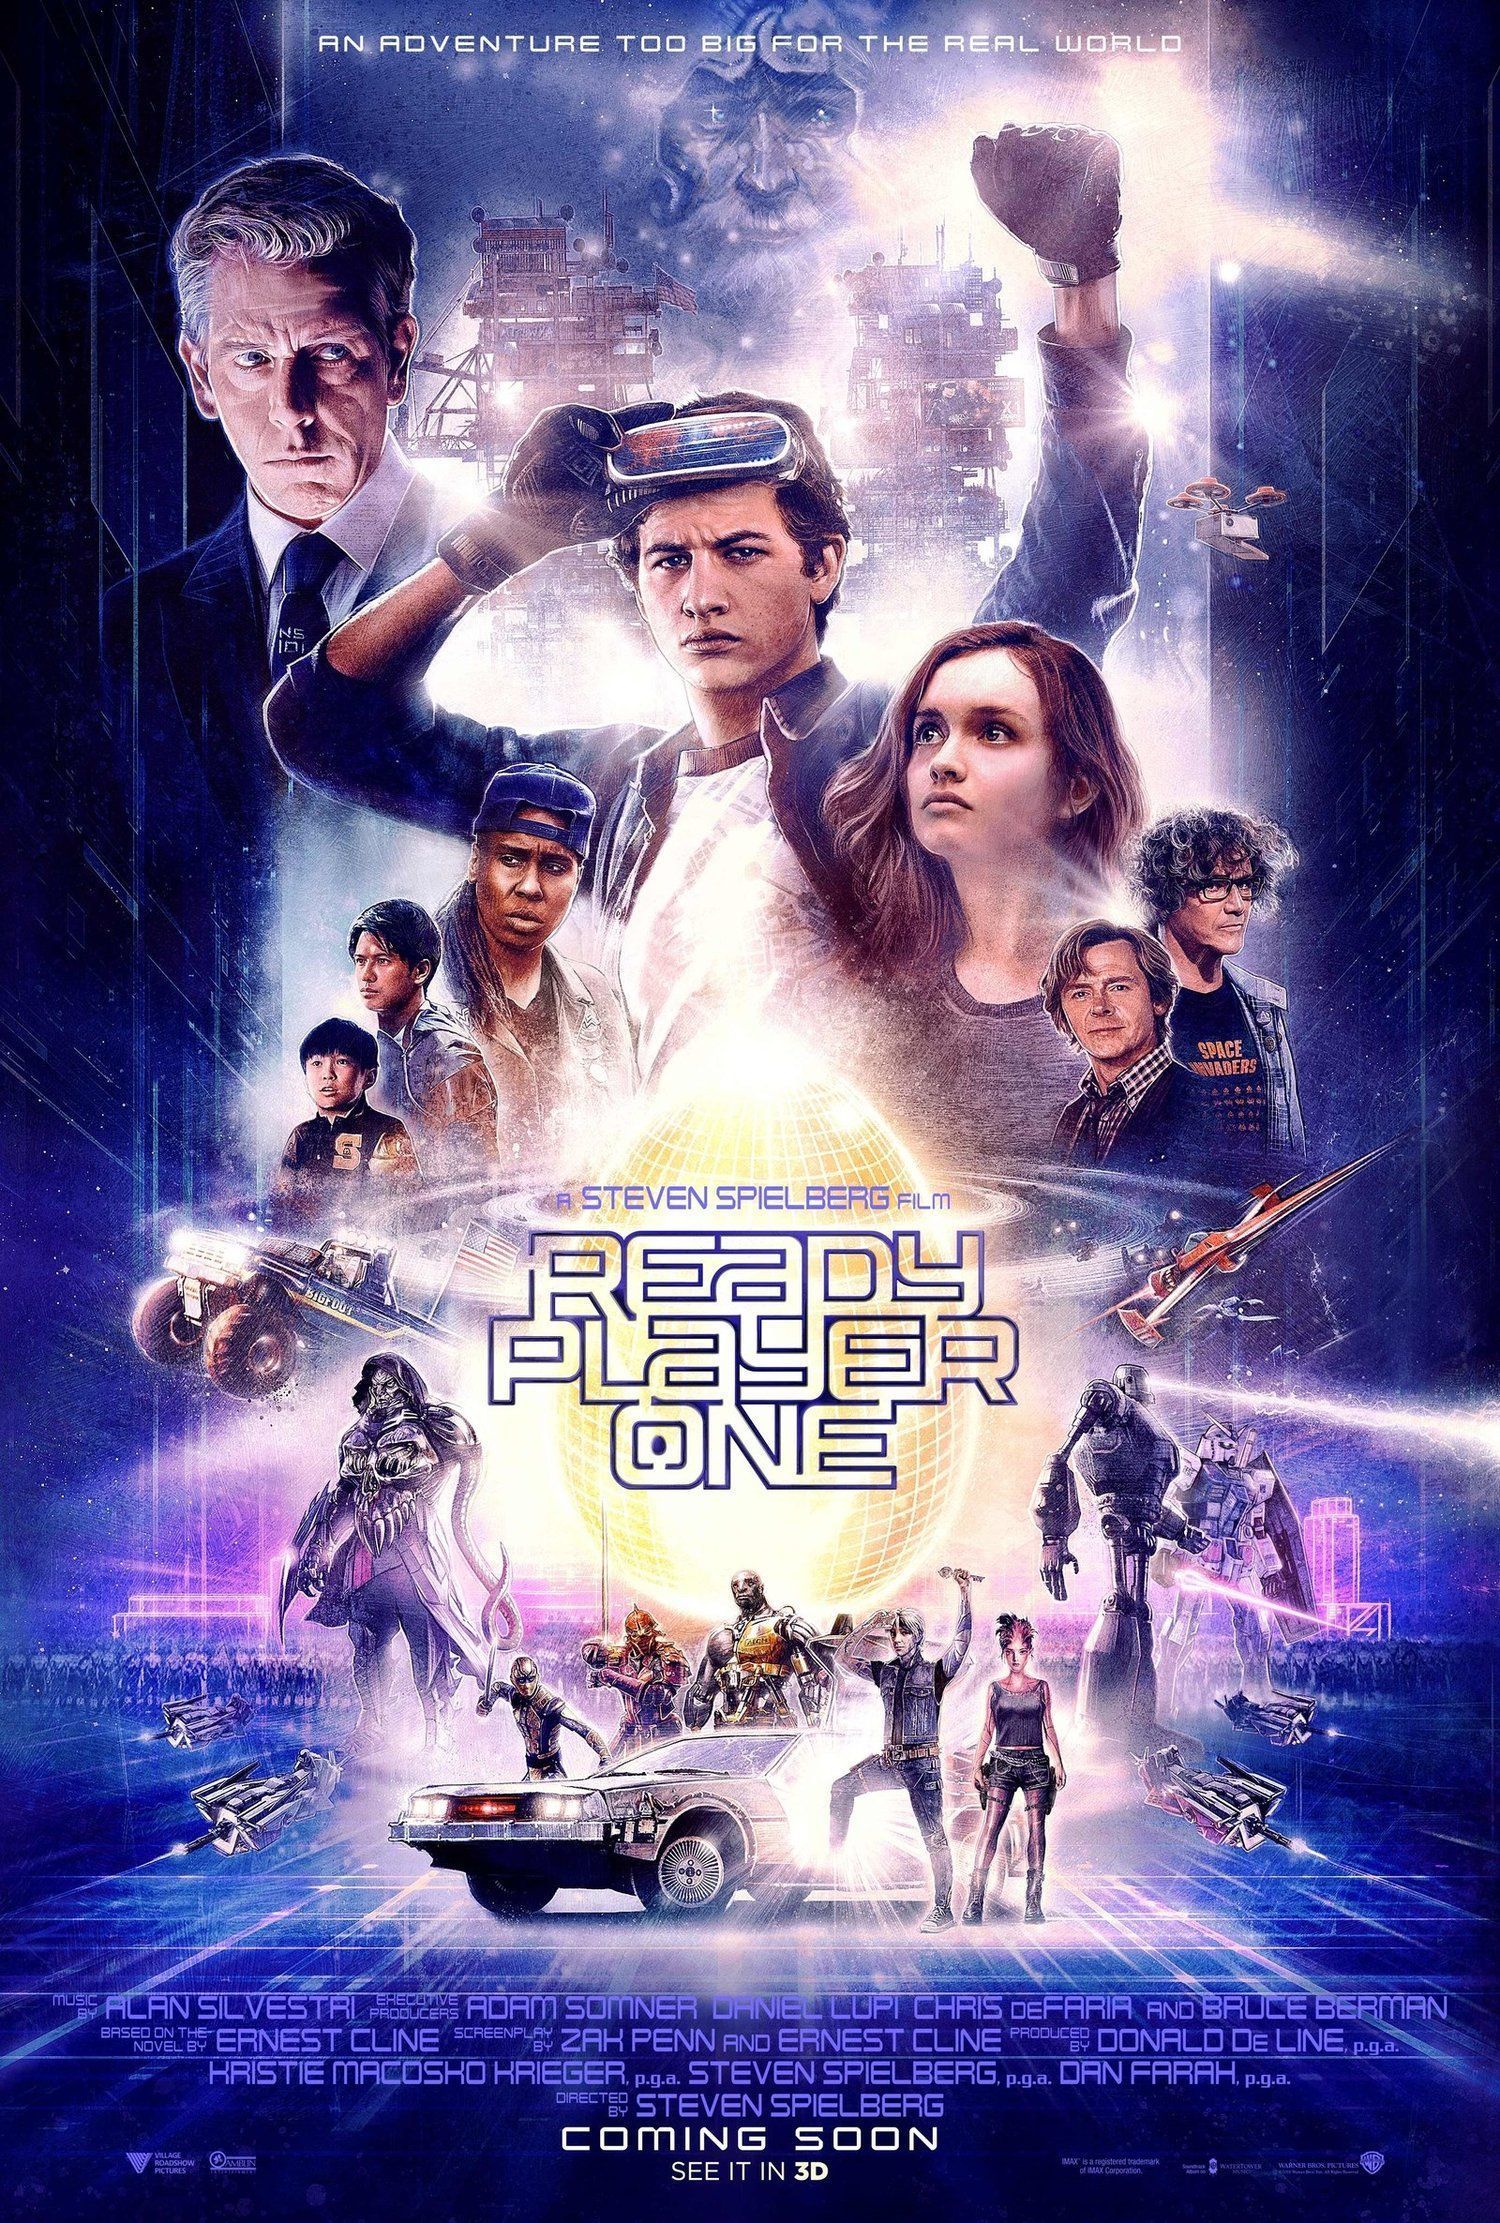 Ready player one art3mis